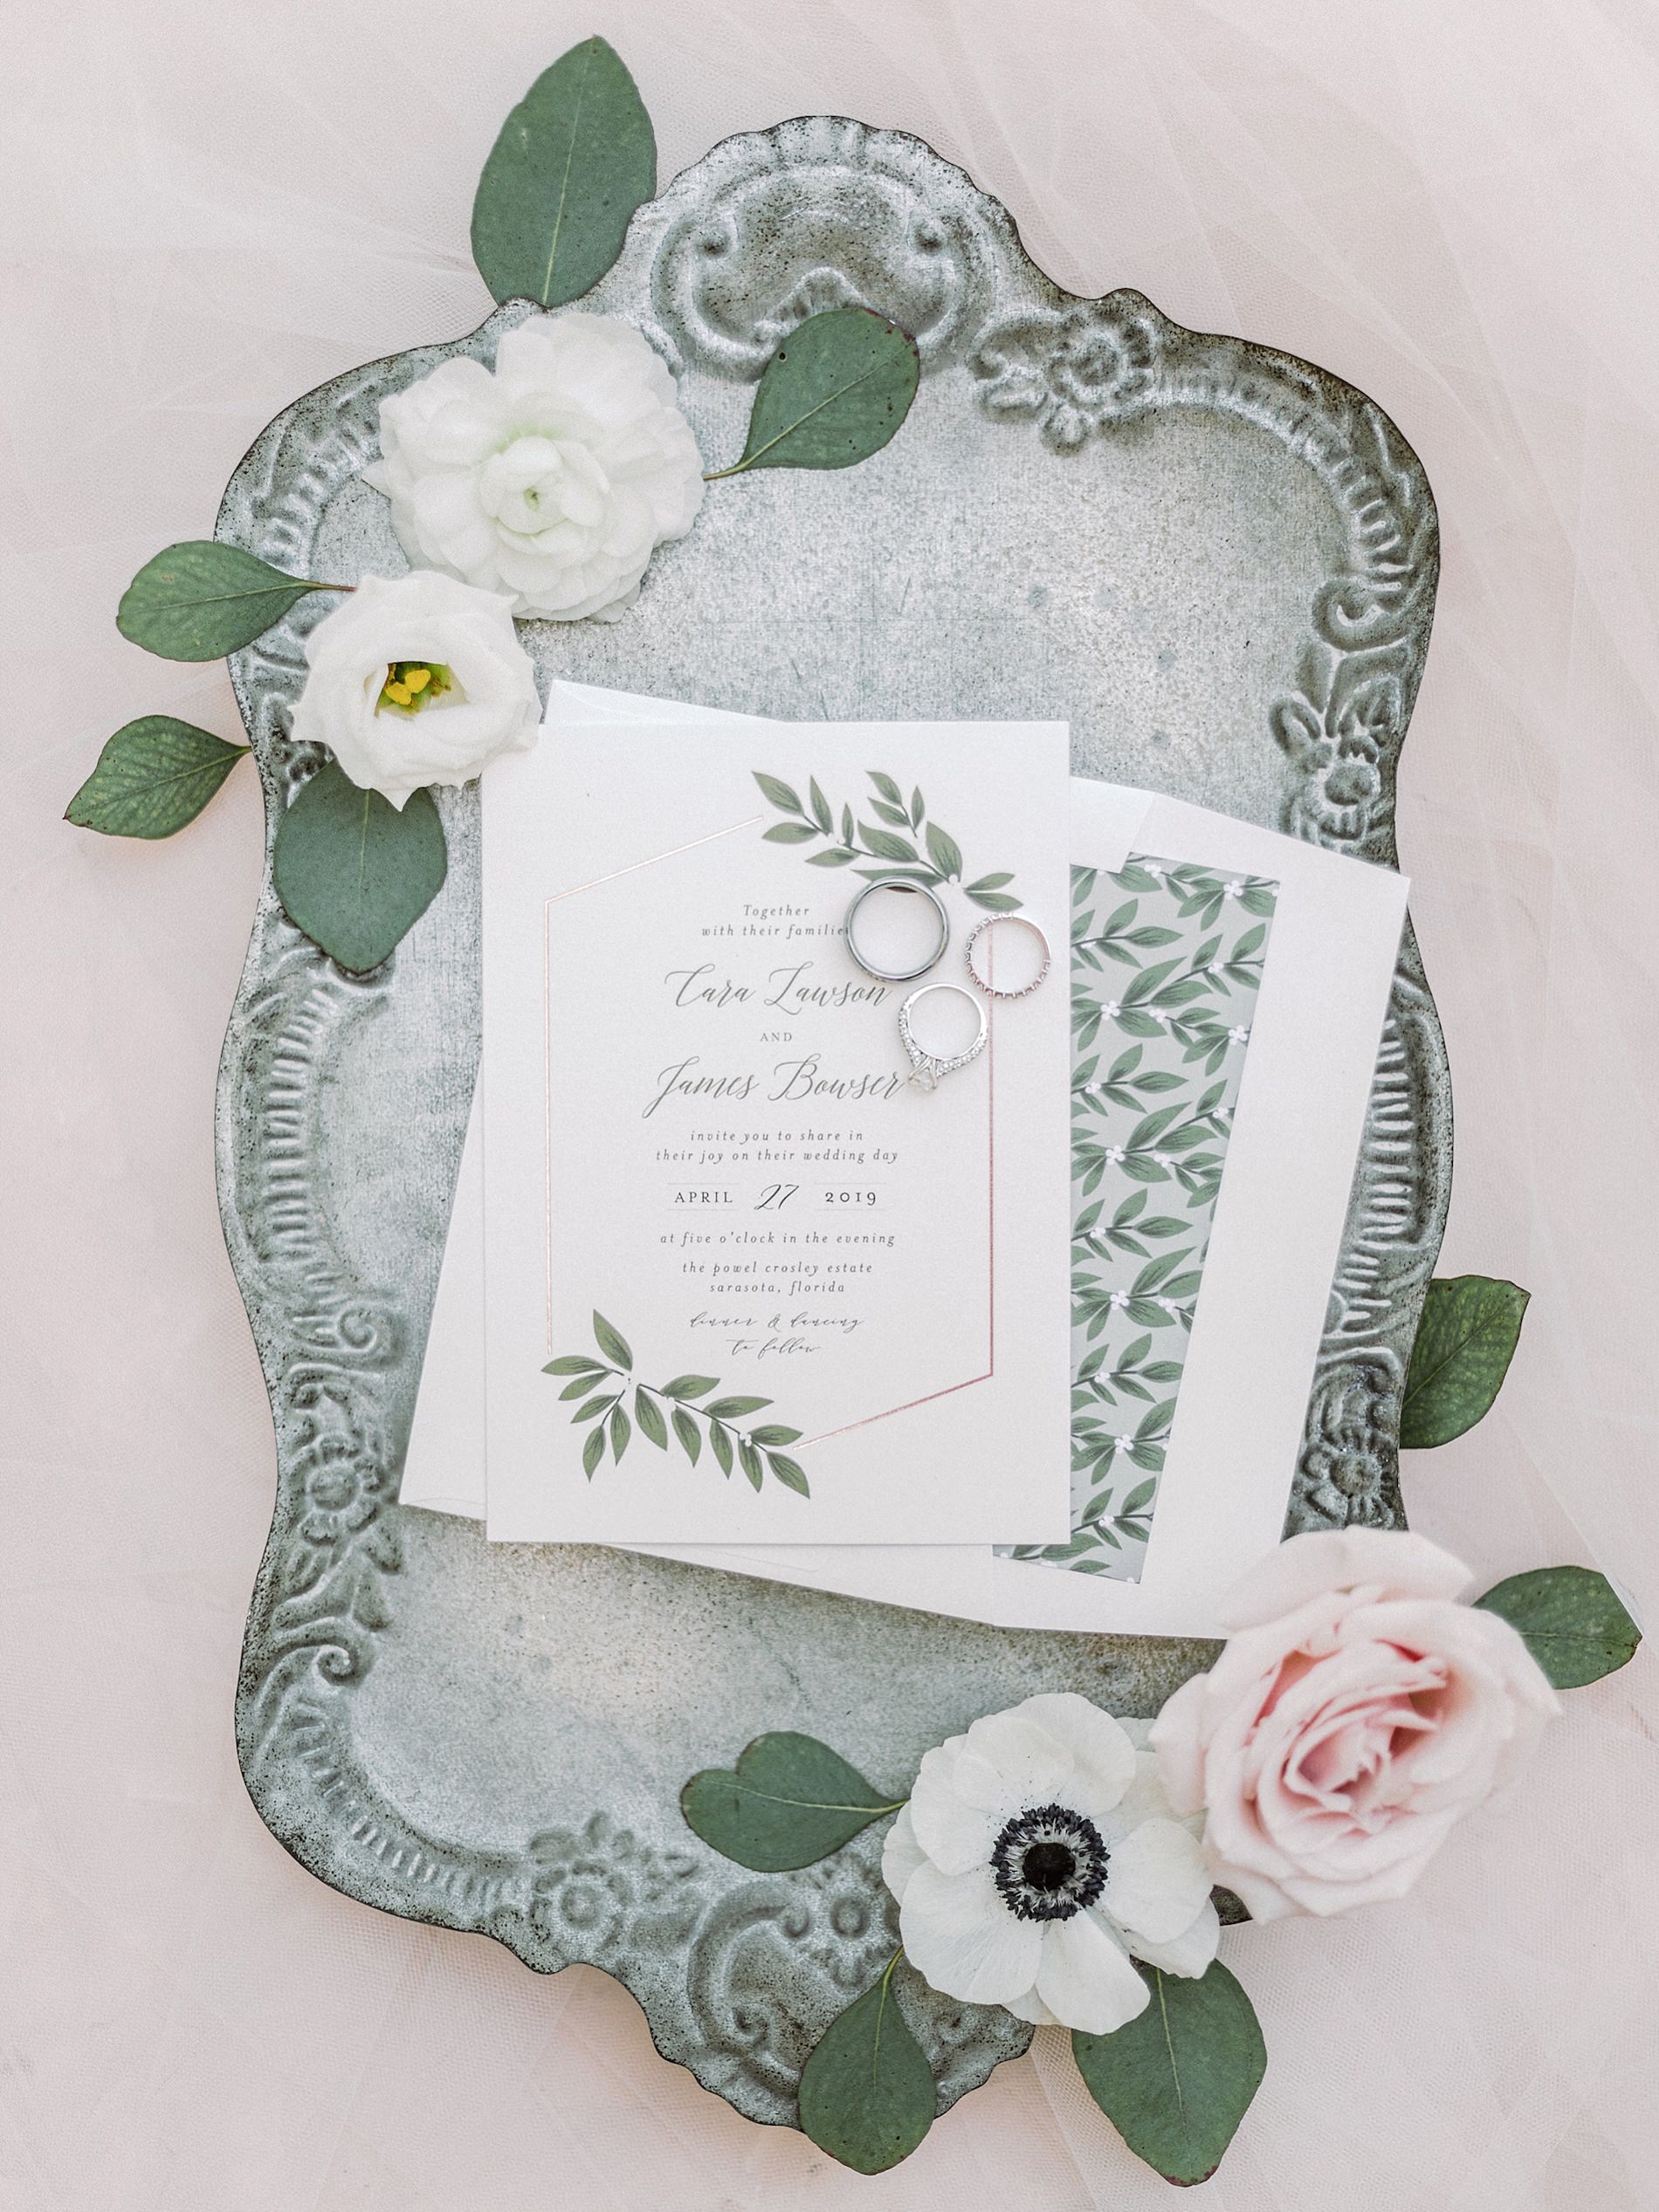 Romantic Elegant White with Green Leaves Wedding Invitation Suite on Antique Tray